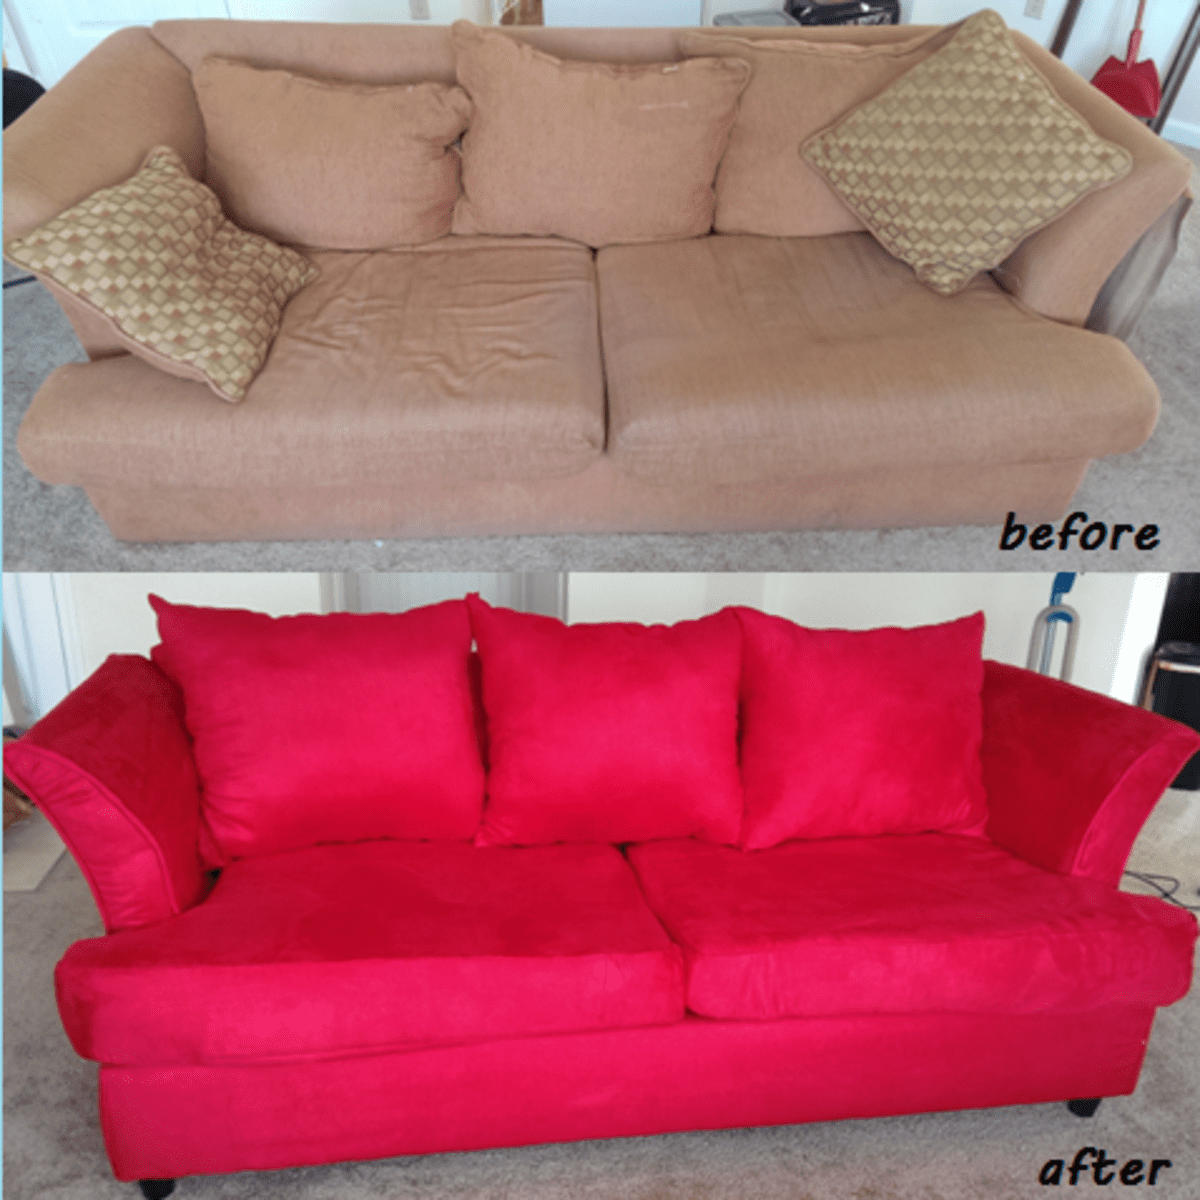 Reupholstering A Couch, How Much Does It Cost To Reupholster A Sofa And Loveseat